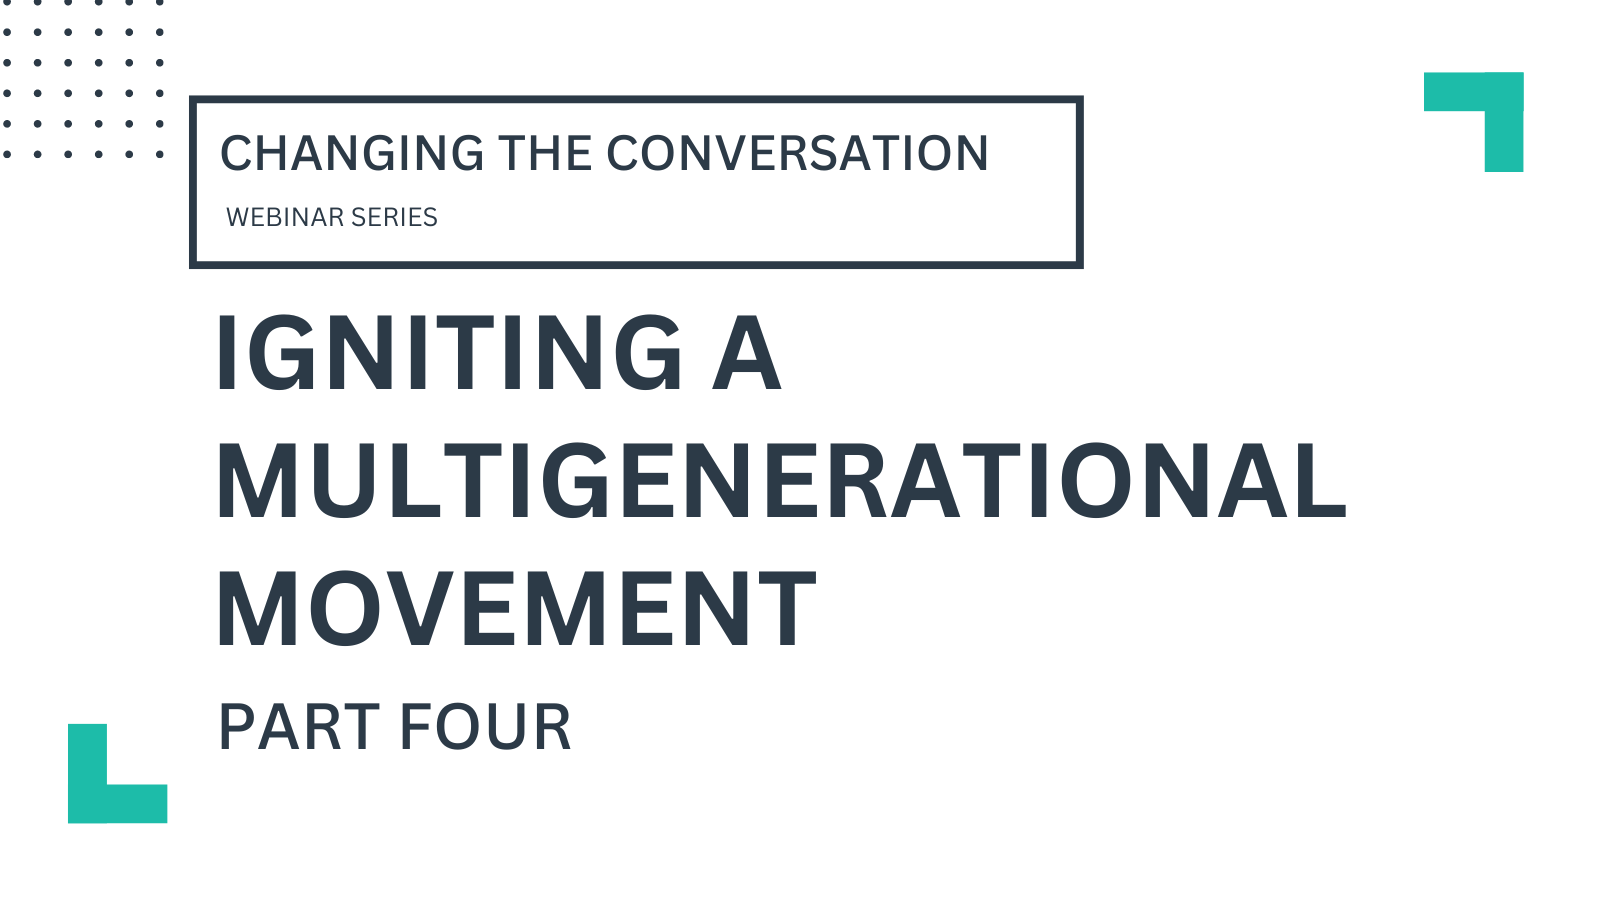 Changing the Conversation Topic: Igniting a Multigenerational Movement